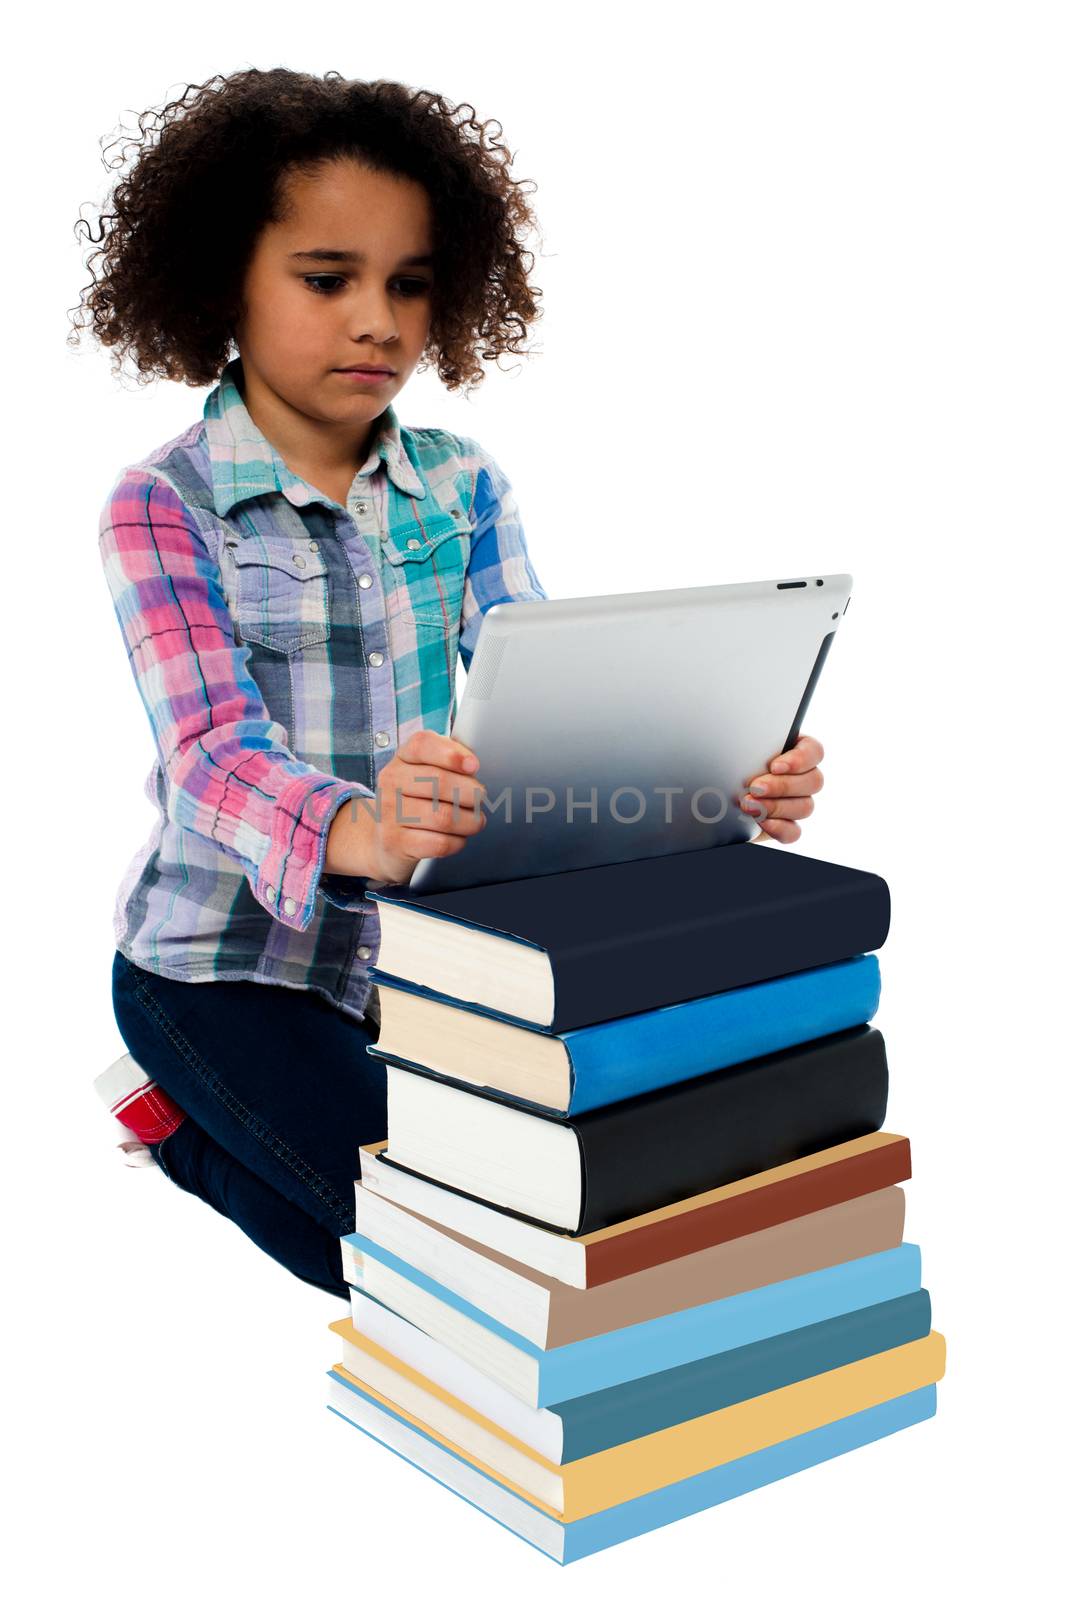 Tablet help me to learn more.  by stockyimages